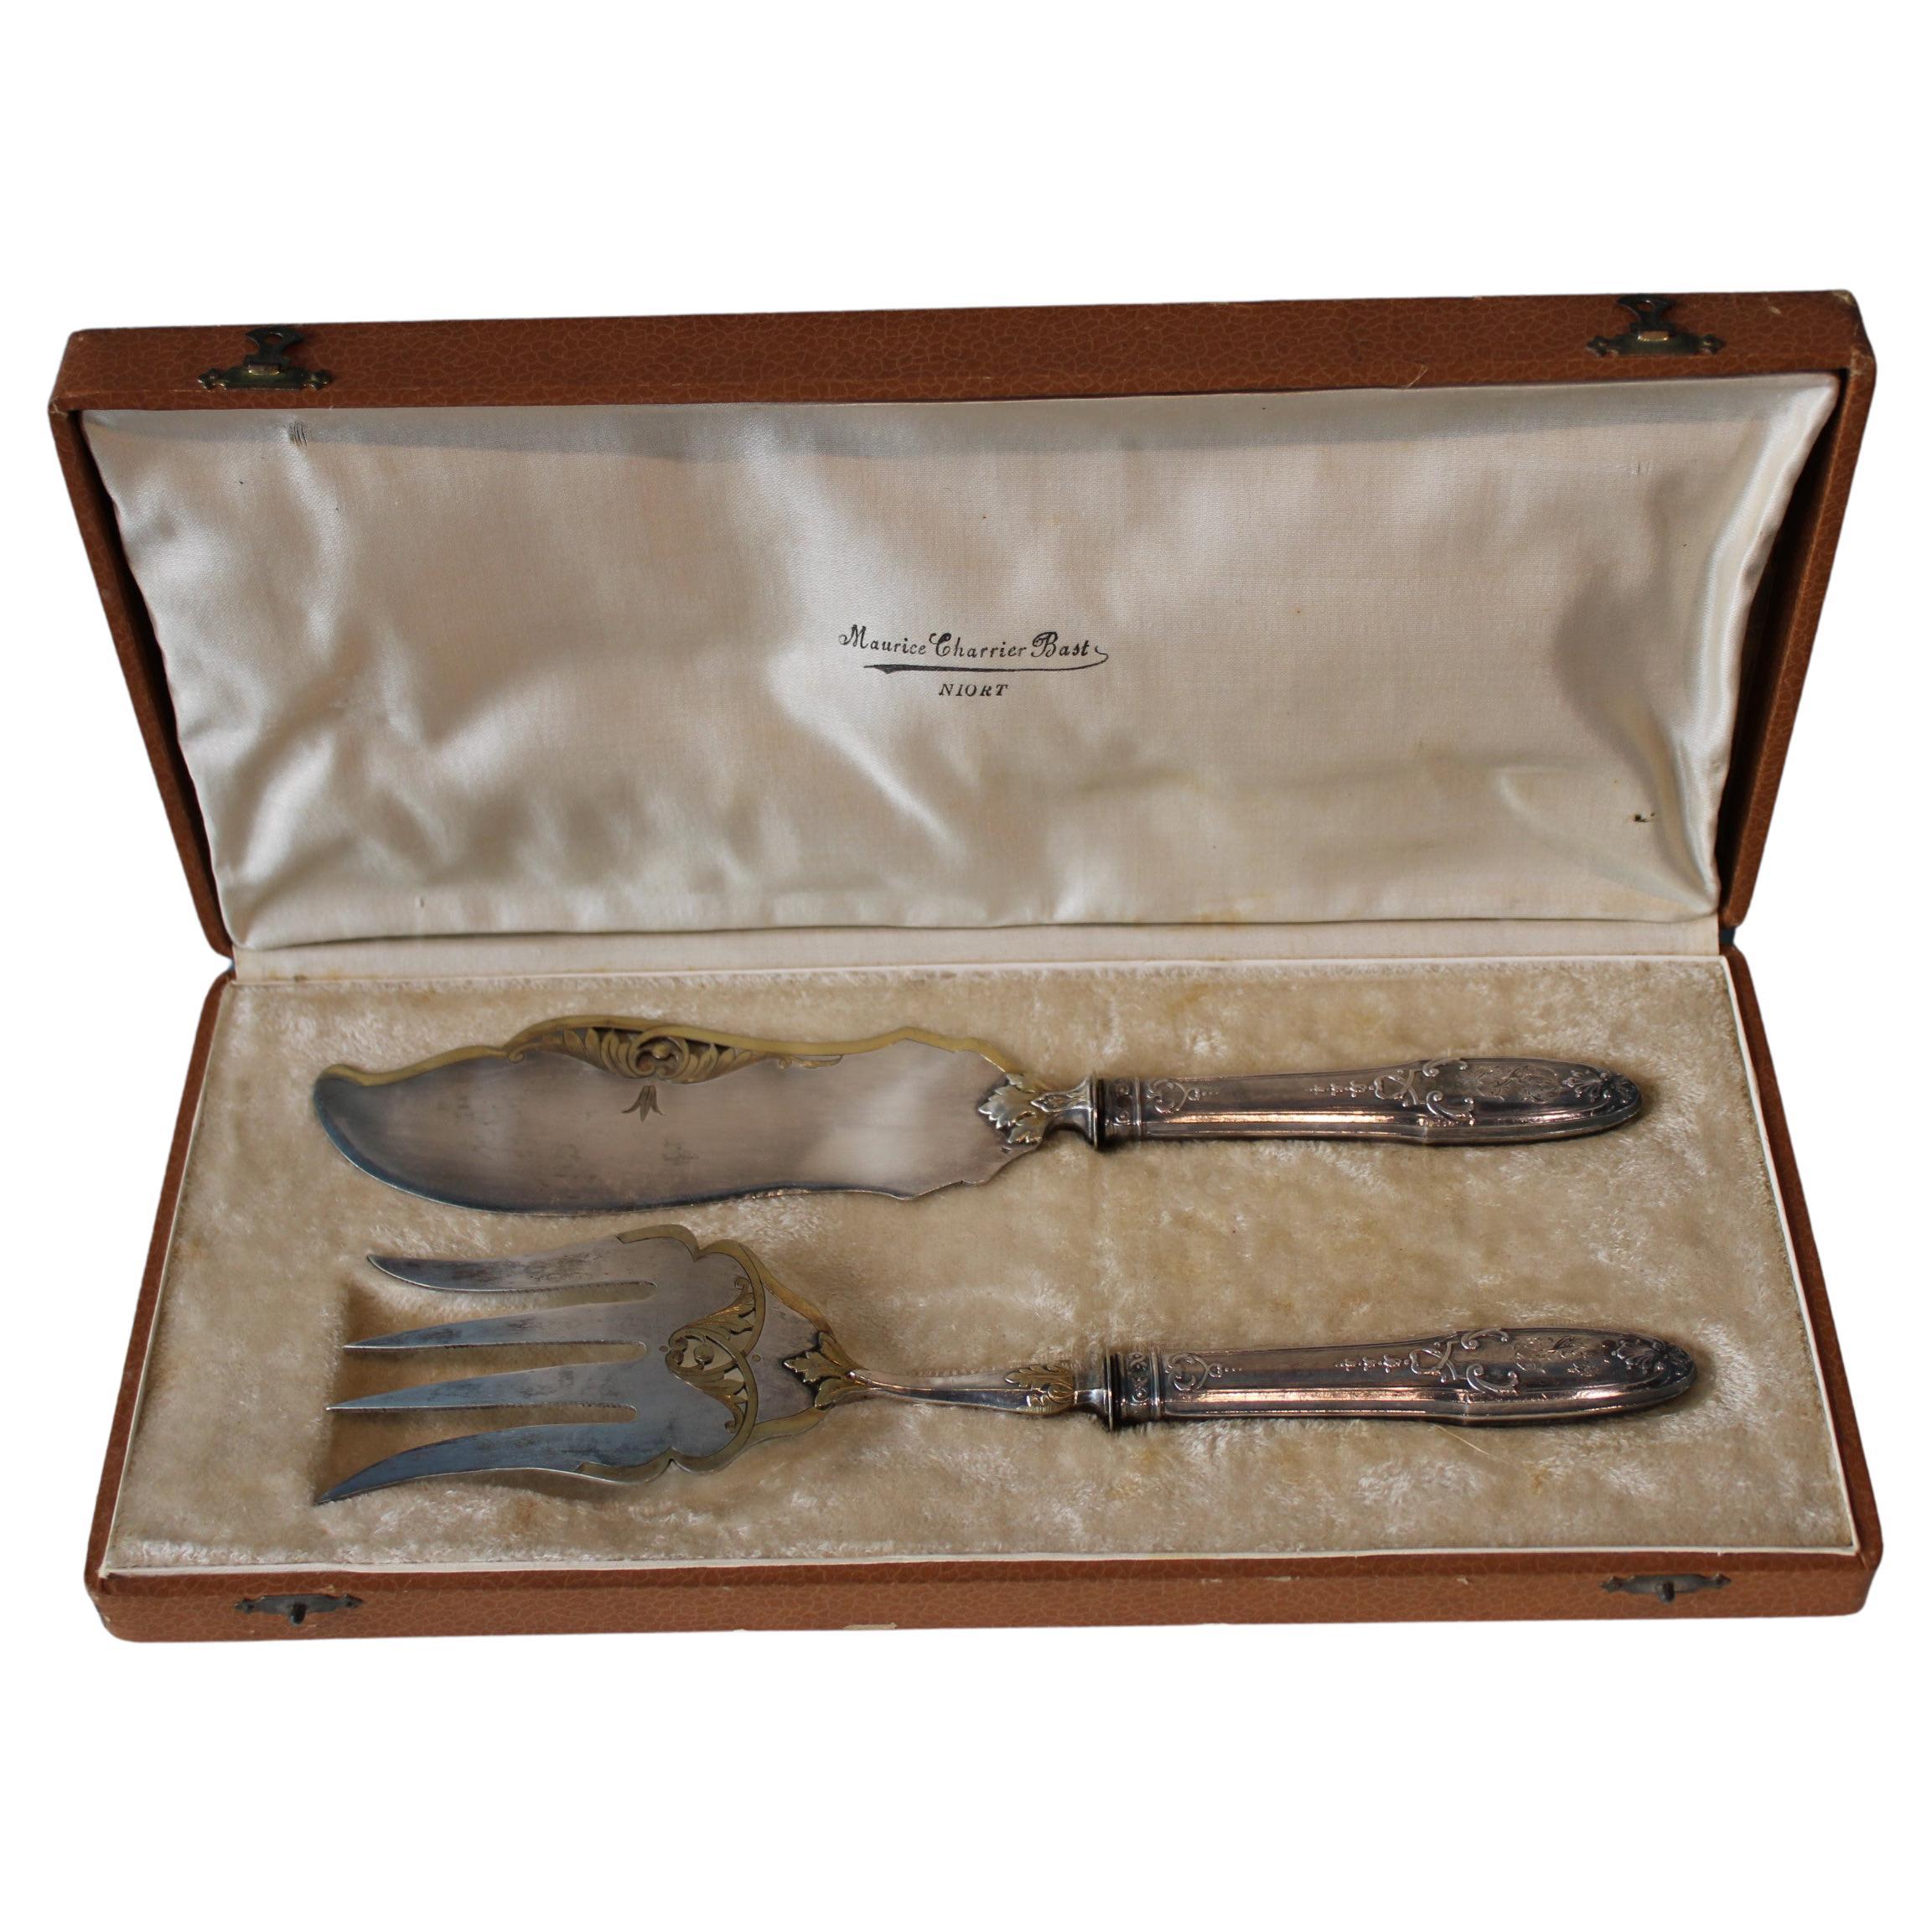 Silver and gold metal serving cutlery in their box